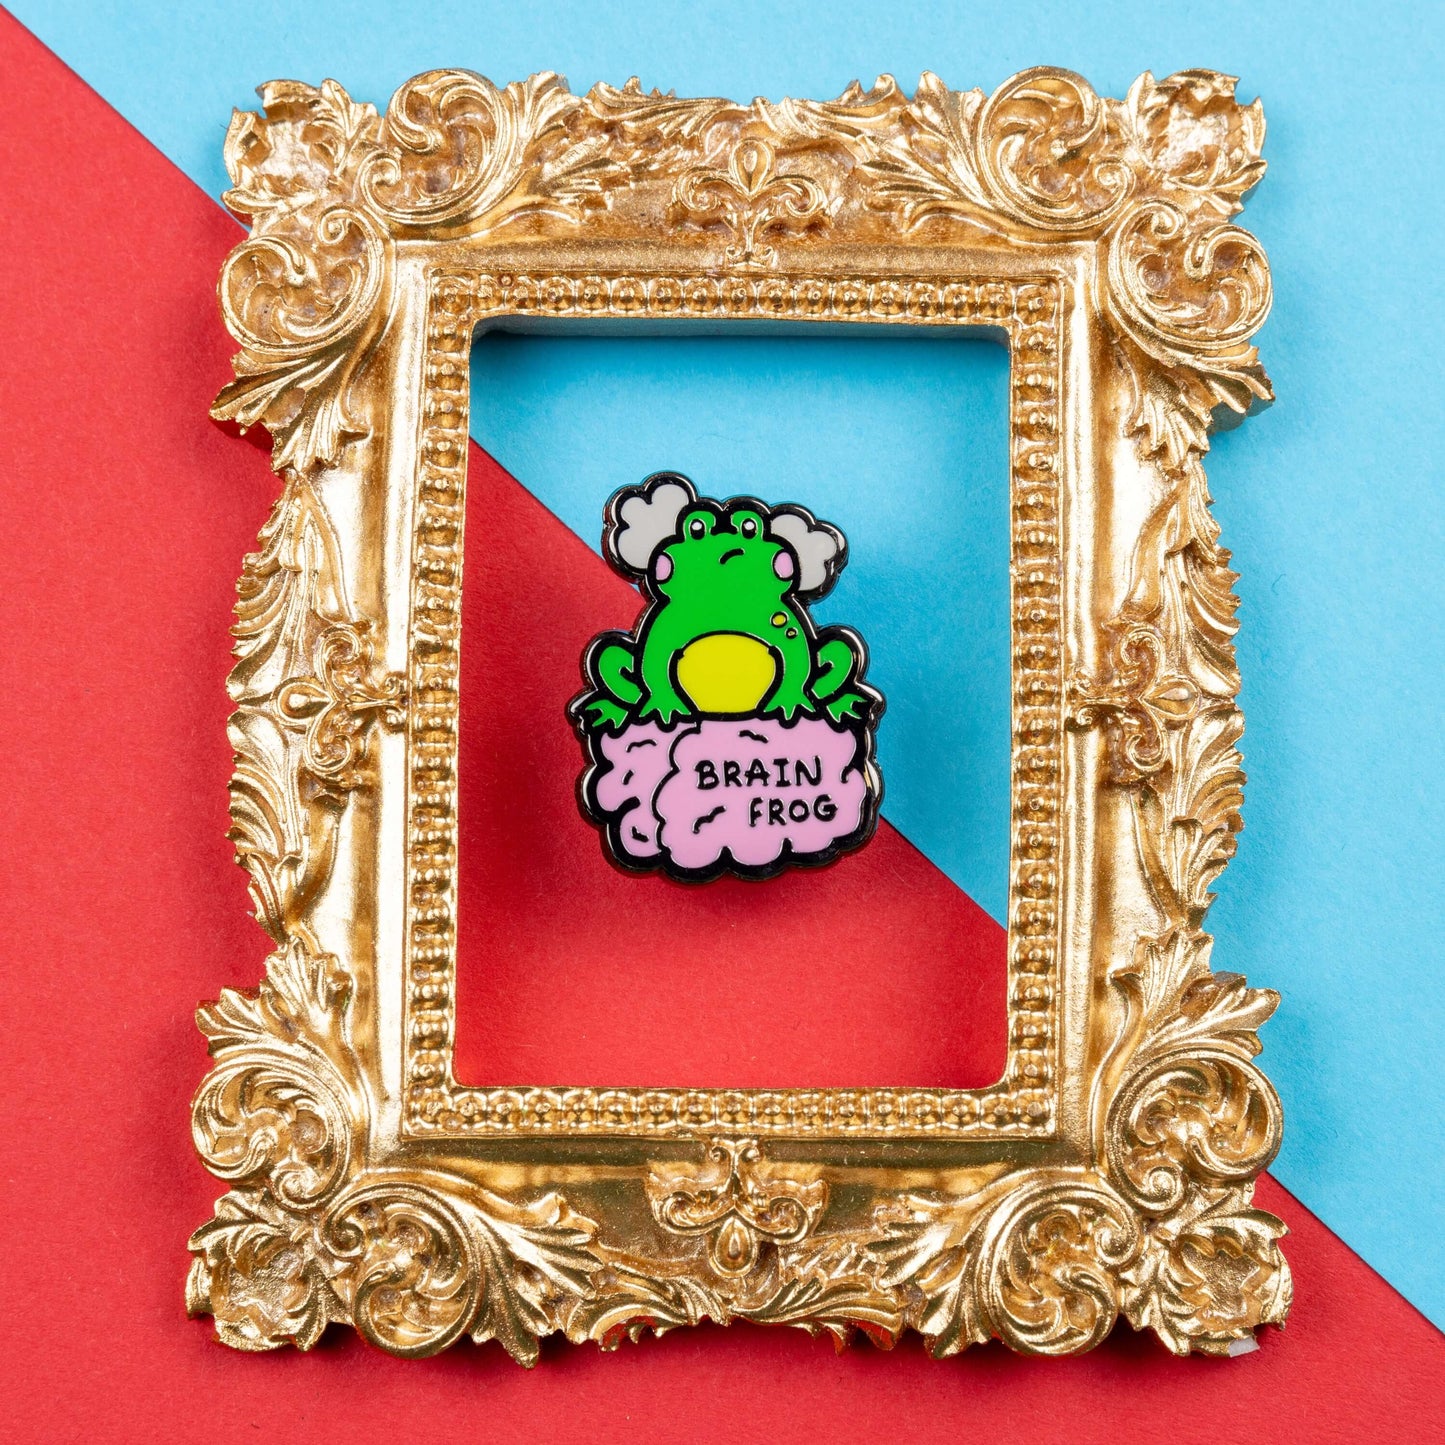 The Brain Frog Enamel Pin - Brain Fog on a blue and red card background inside a gold ornate frame. The pin is of a green frog with pink blush cheeks looking confused with two grey clouds by its head, it is sat on a pink brain with the text reading Brain Frog. The design is raising awareness for brain fog.